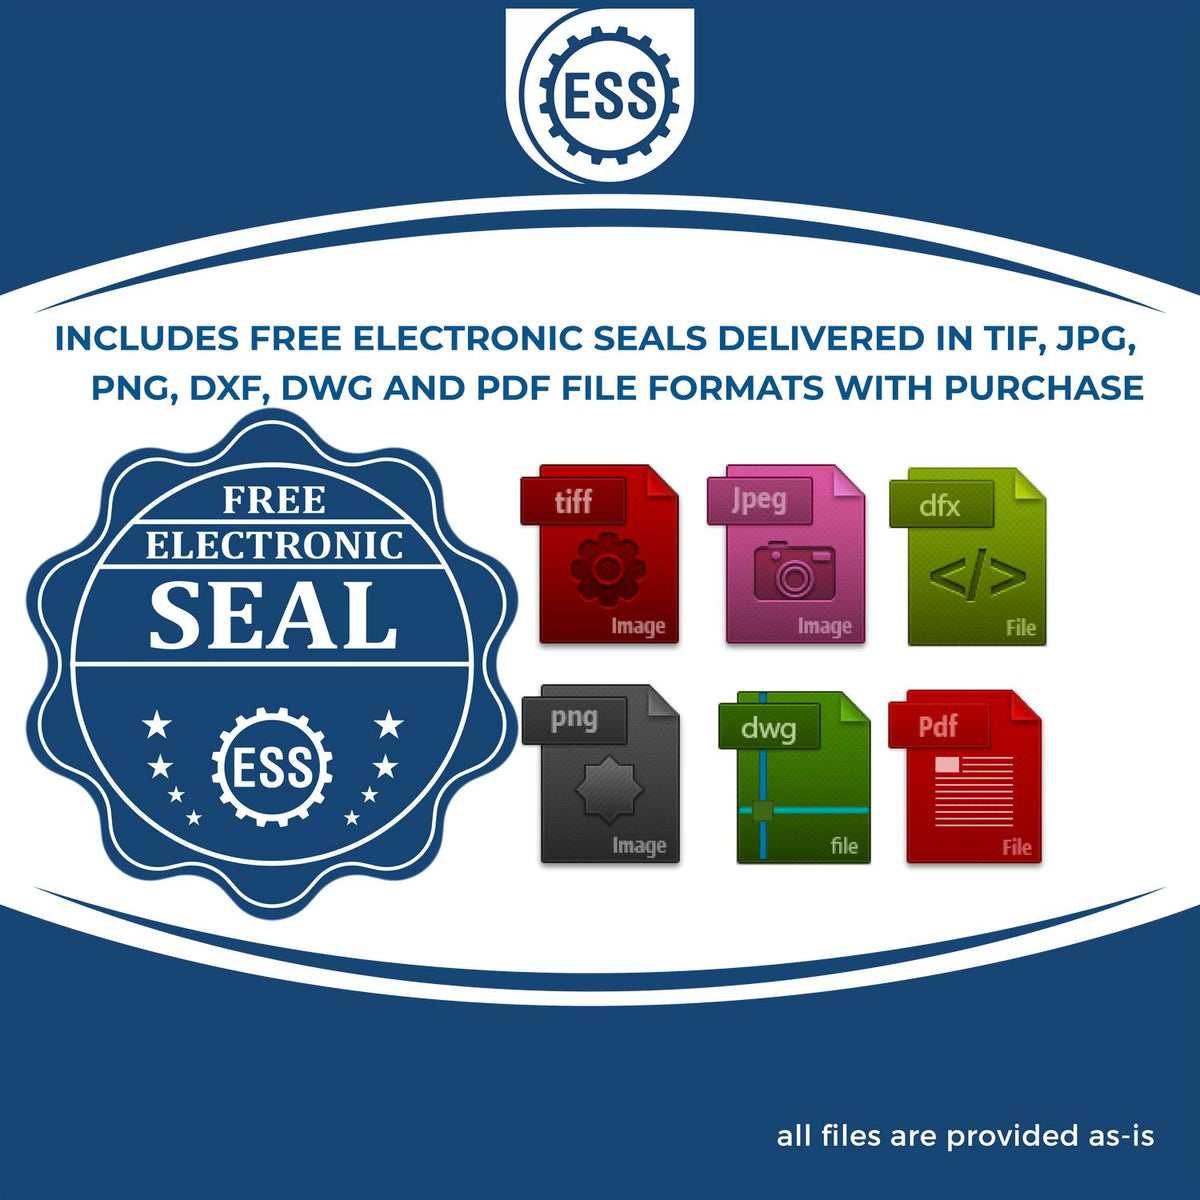 An infographic for the free electronic seal for the Heavy Duty Cast Iron Iowa Land Surveyor Seal Embosser illustrating the different file type icons such as DXF, DWG, TIF, JPG and PNG.